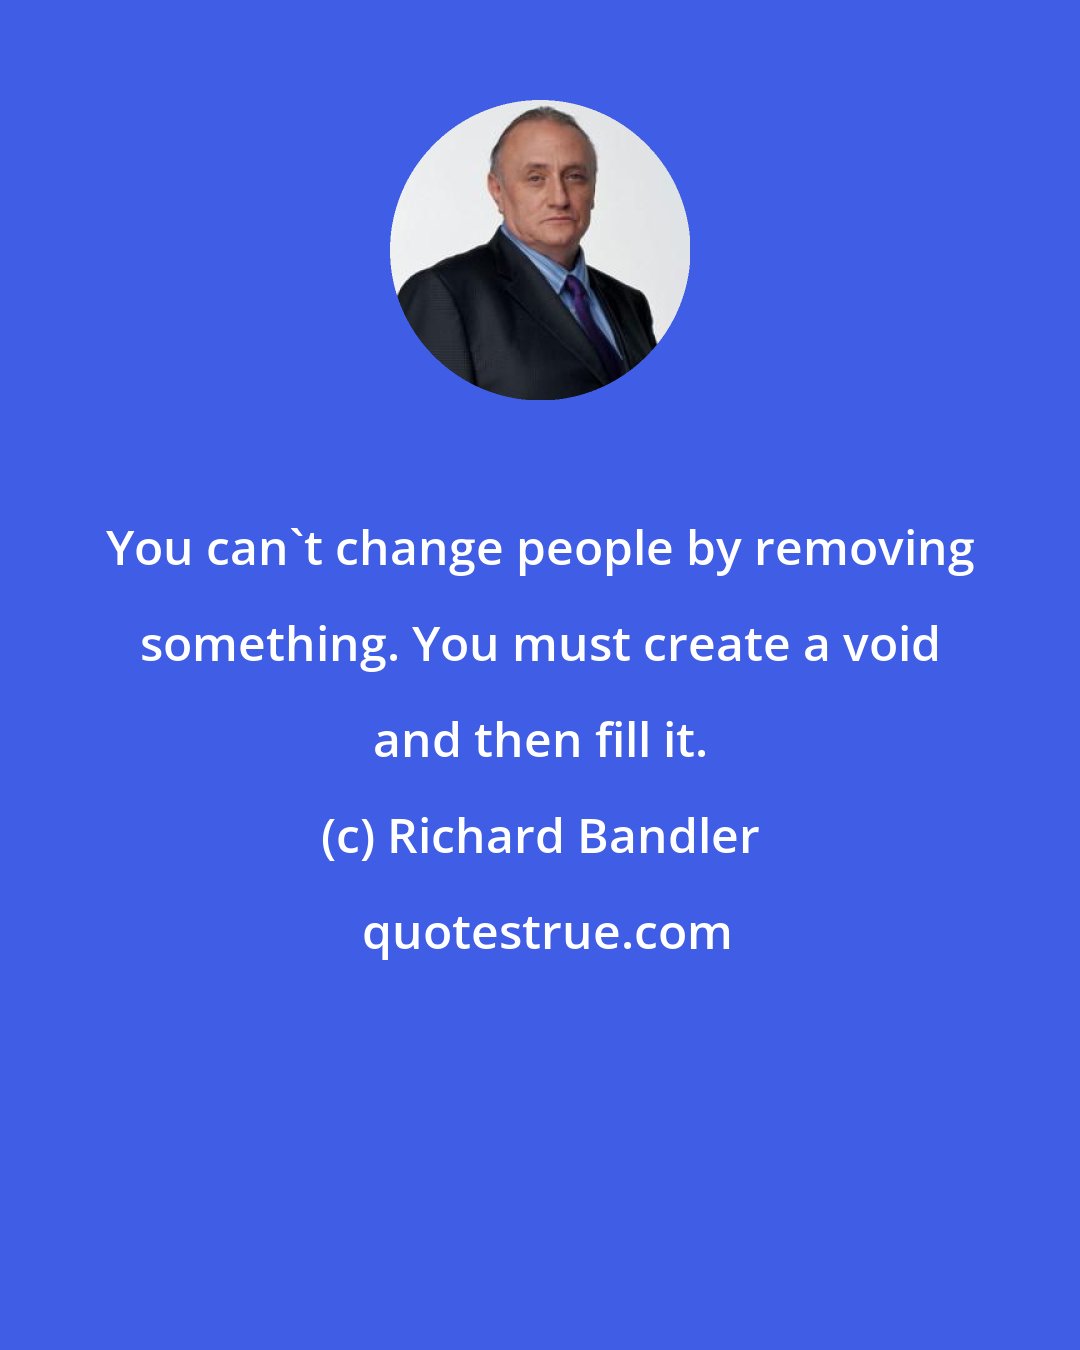 Richard Bandler: You can't change people by removing something. You must create a void and then fill it.